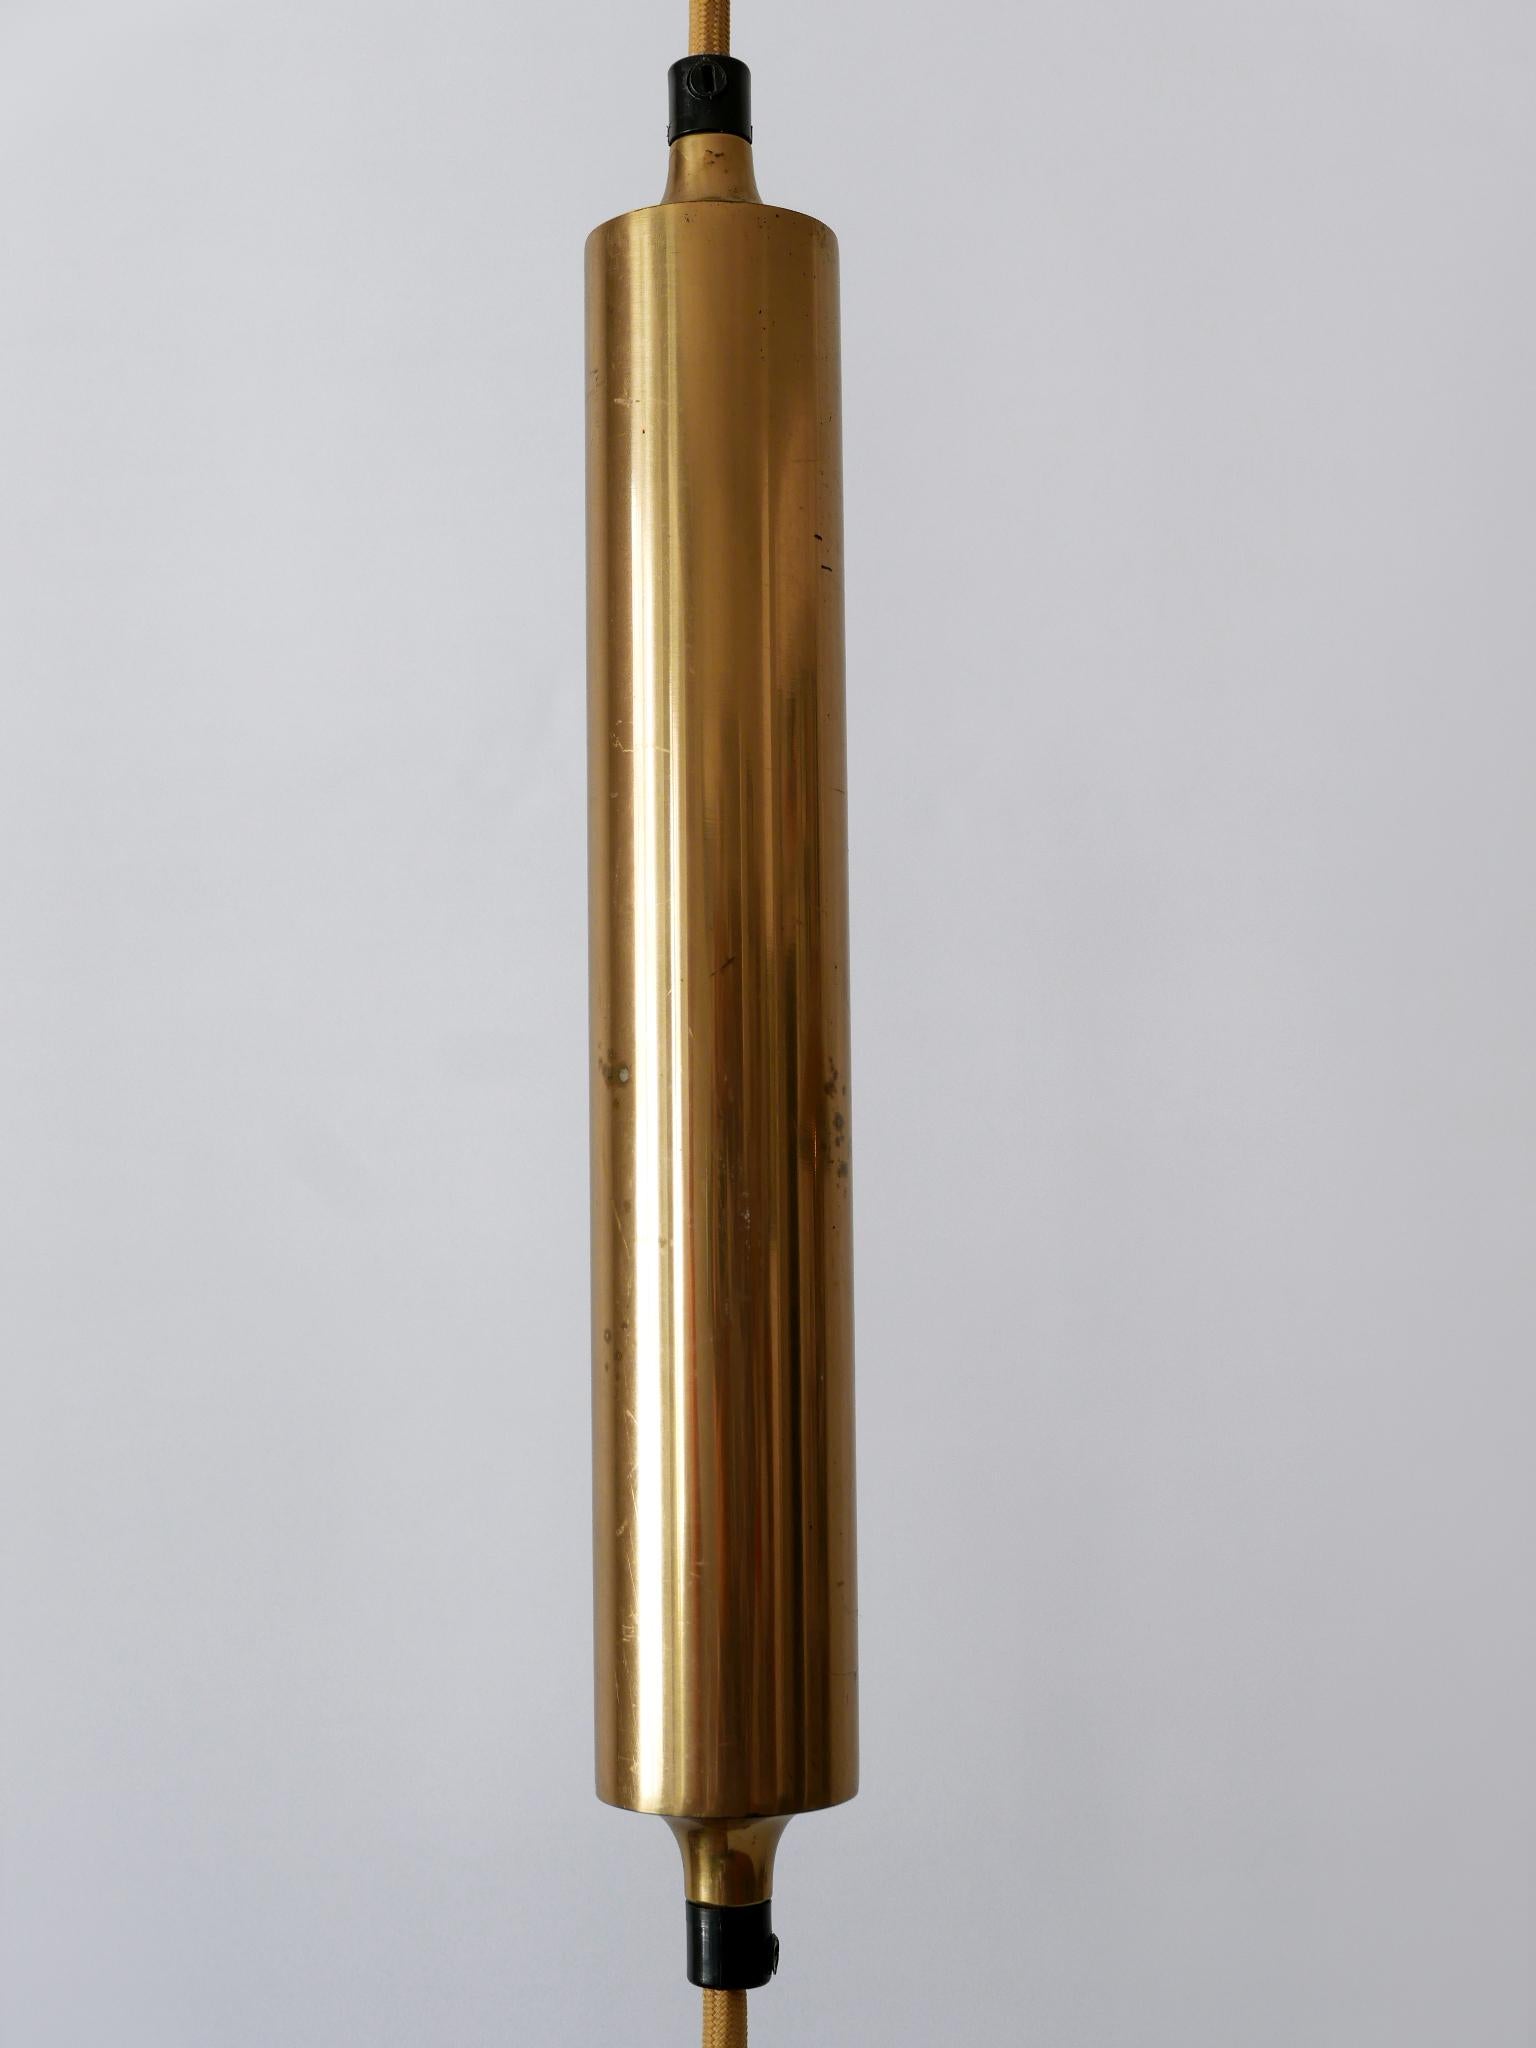 Rare Early Brass Counterweight Pendant Lamp 'Onos 55' by Florian Schulz 1960s 9